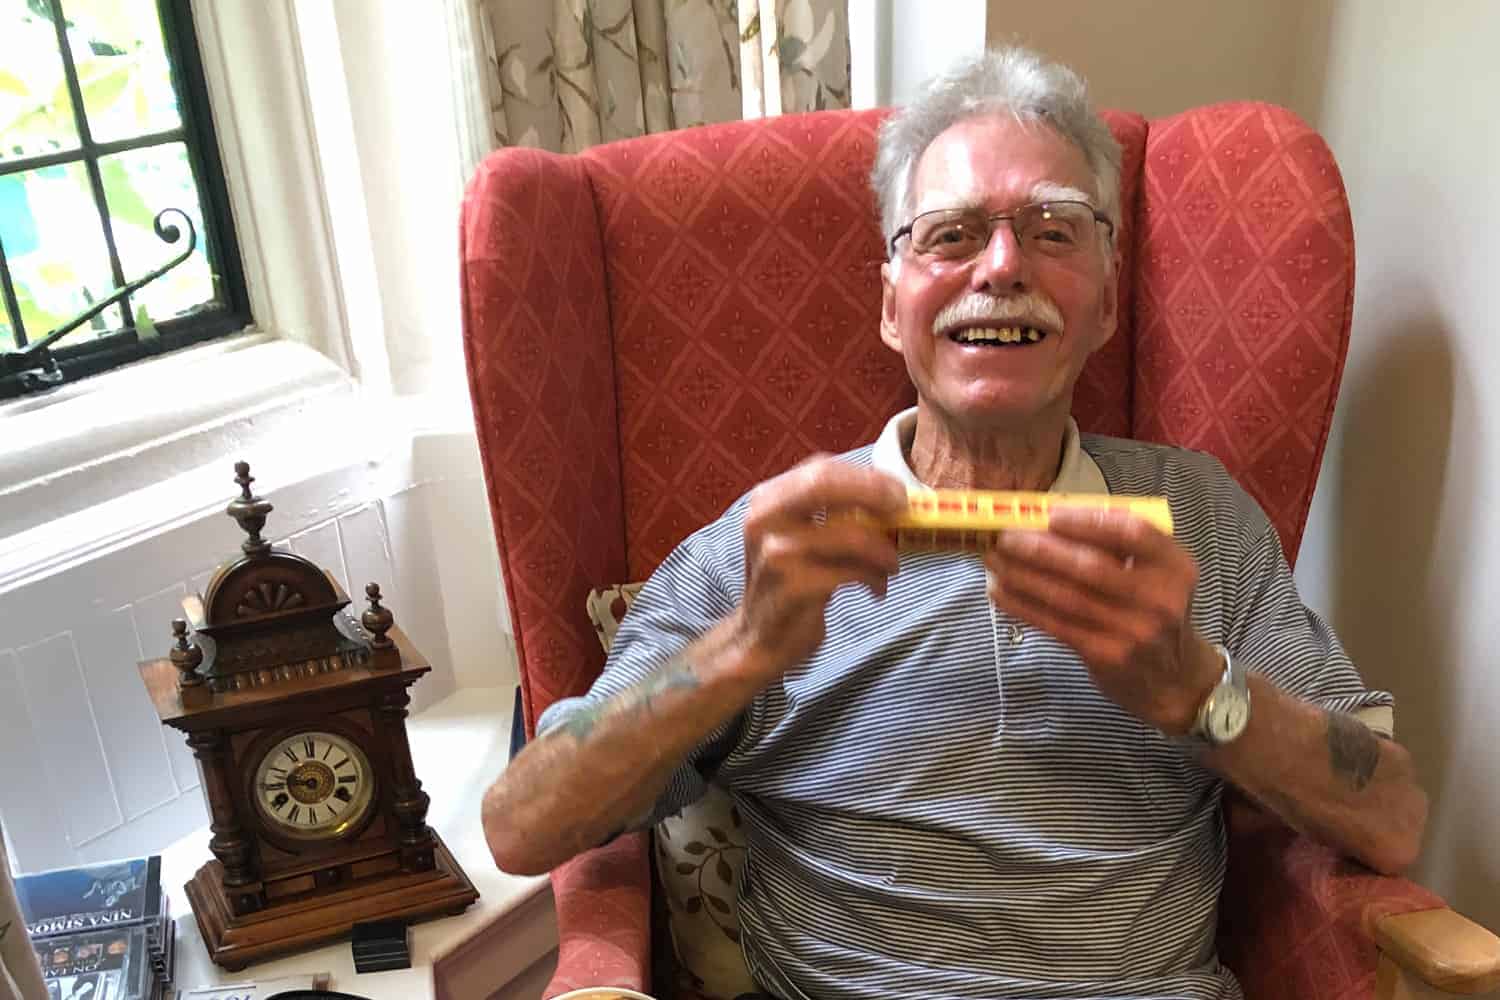 An elderly person with a bright smile sits in a patterned armchair, holding a small object related to their personalized healthcare plan, with a vintage mantle clock on a table beside them.